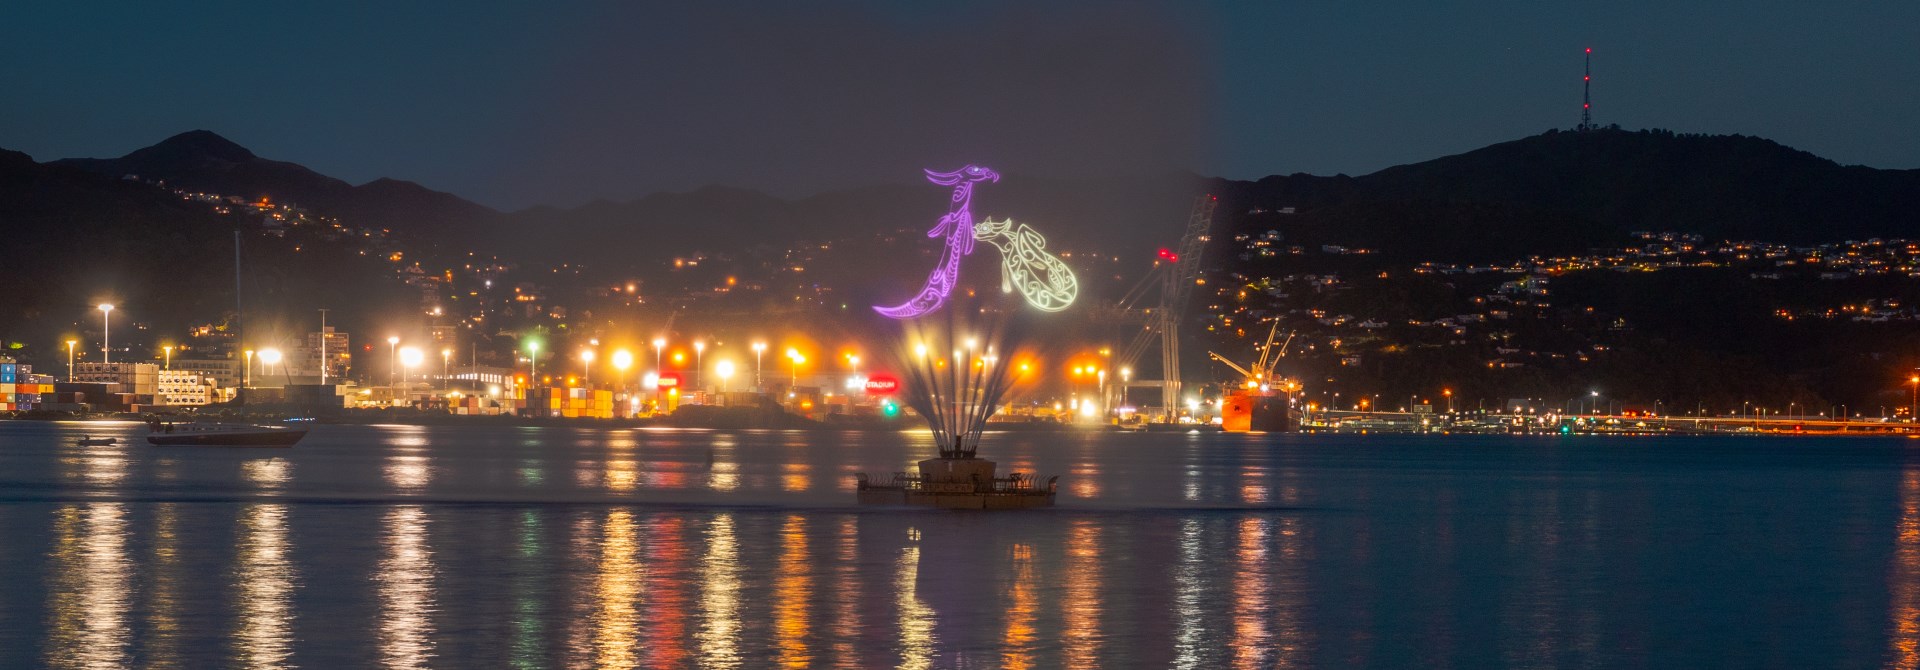 The carter fountain on oriental bay.